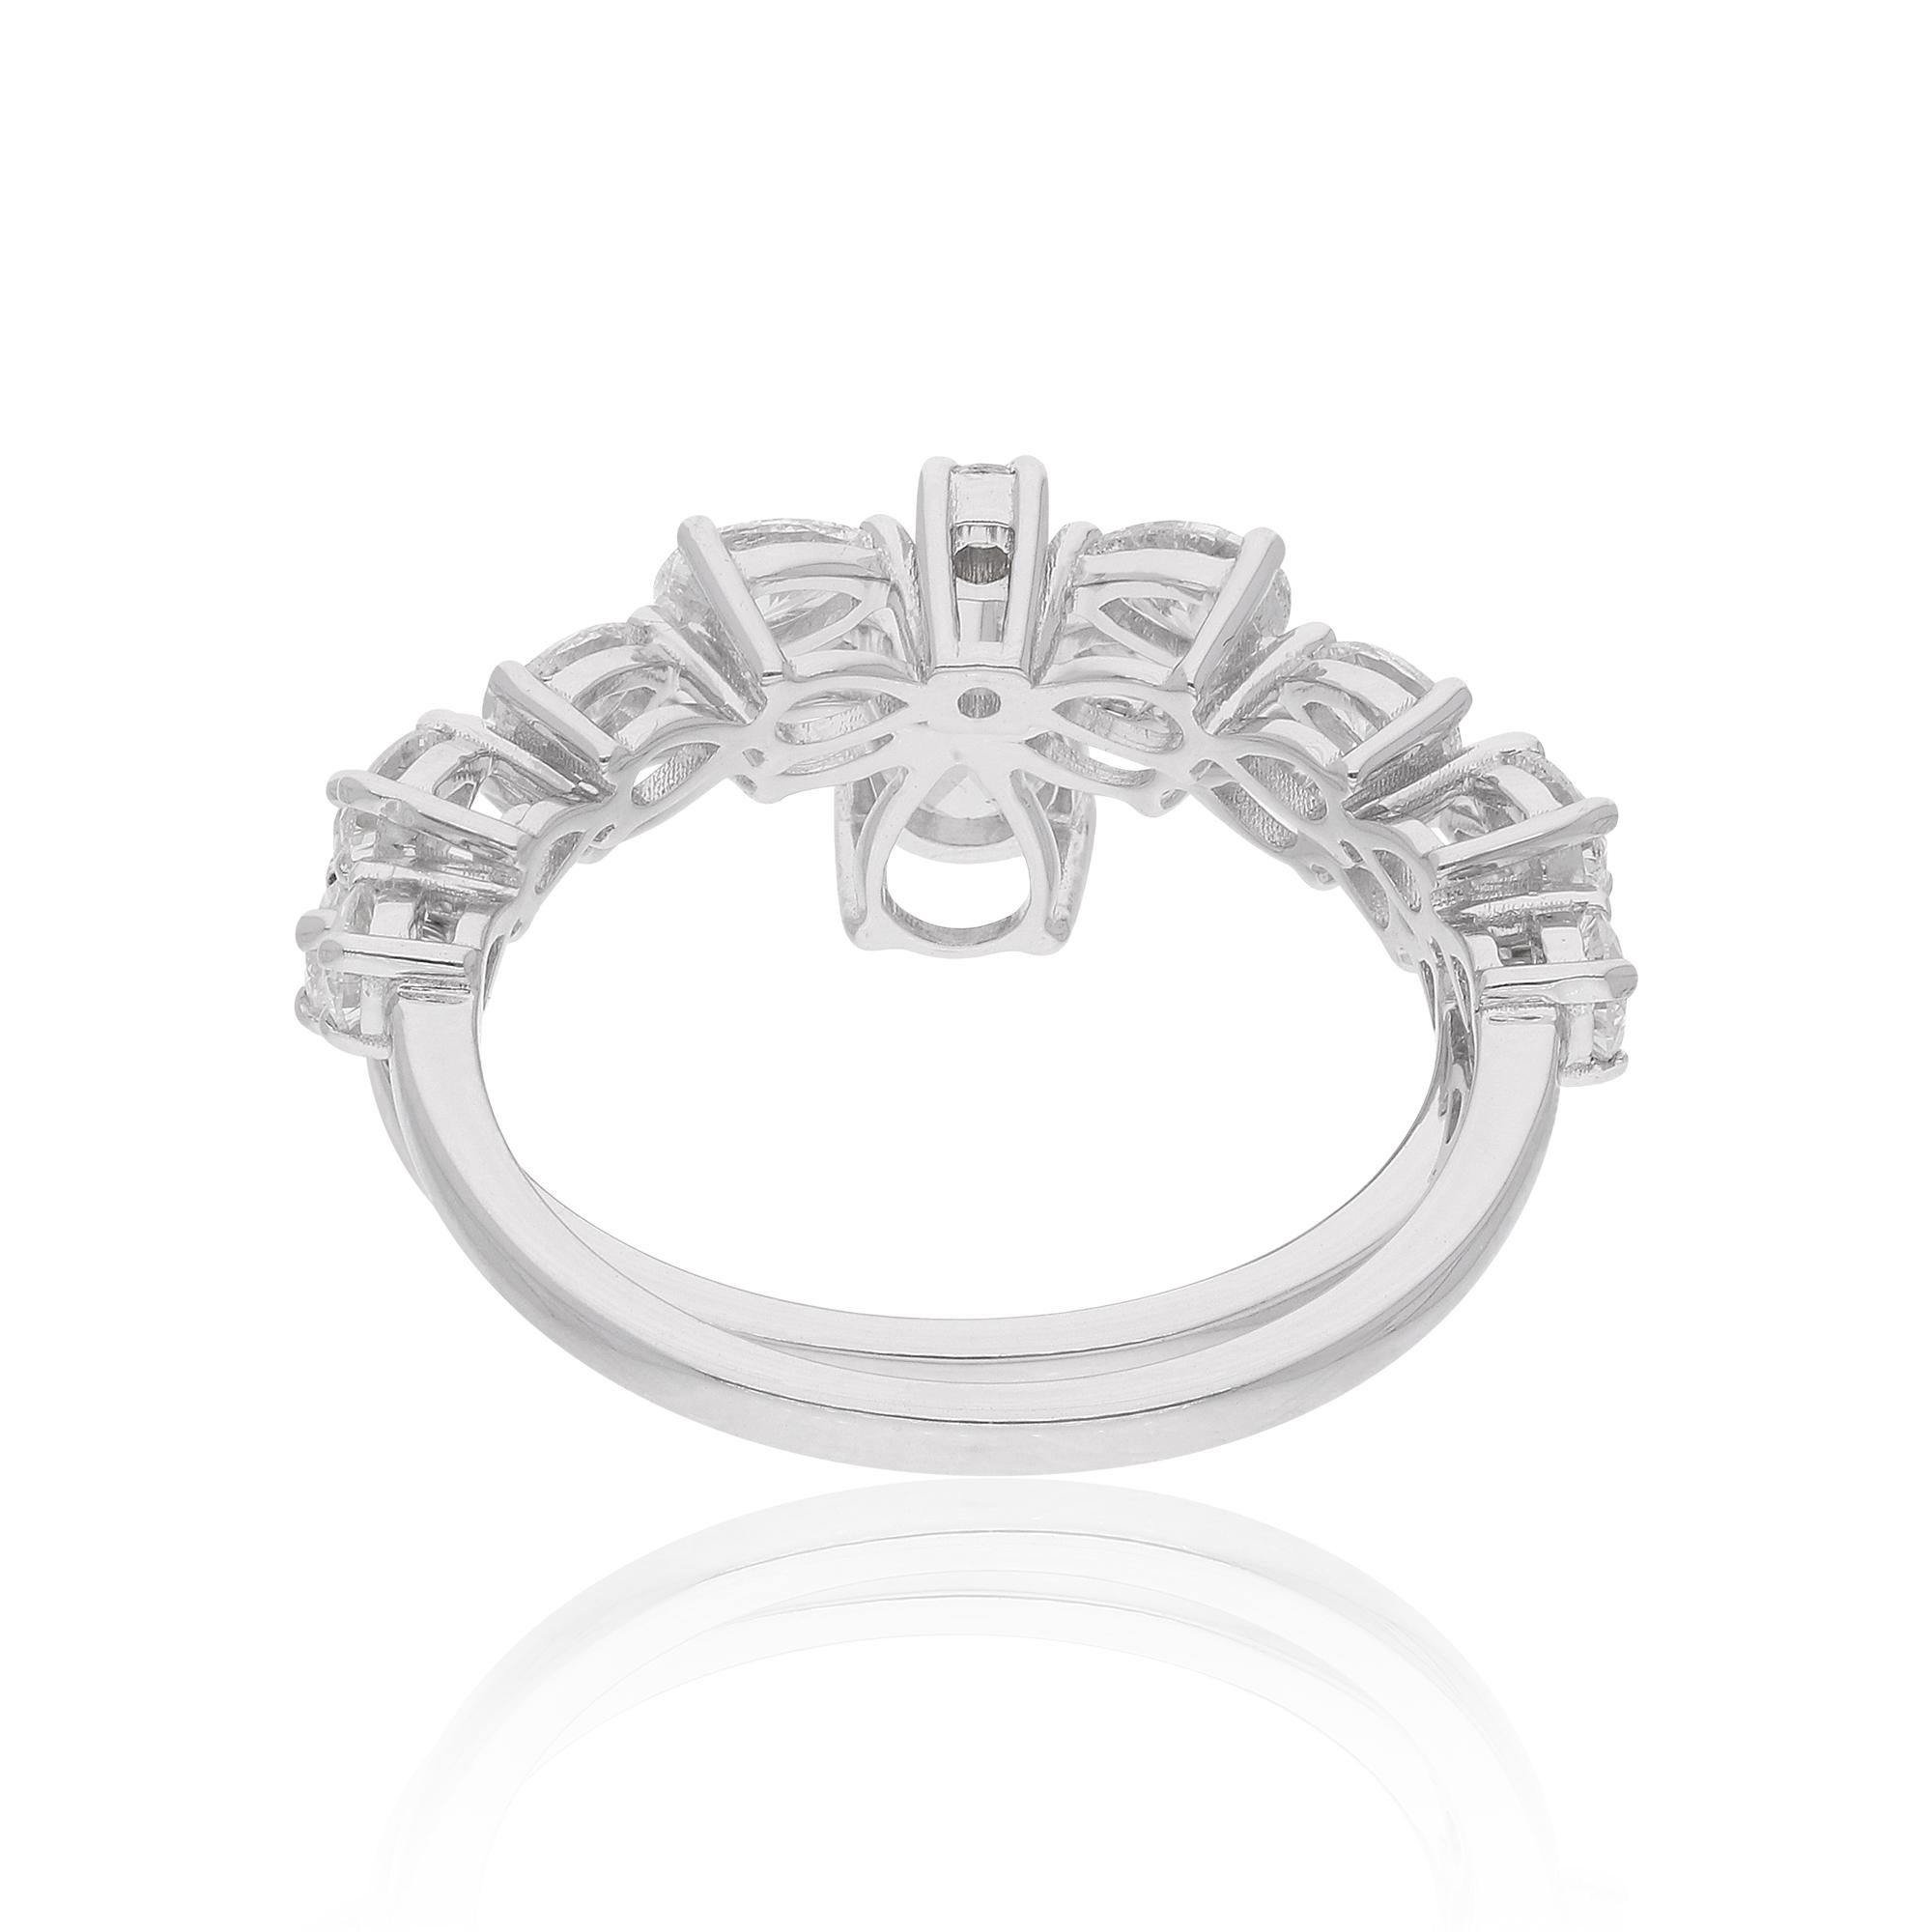 The two-ring set offers versatility in style and can be worn as engagement and wedding rings, anniversary rings, or as a fashionable stacked set for everyday wear. The rings may feature additional design elements, such as intricate metalwork or